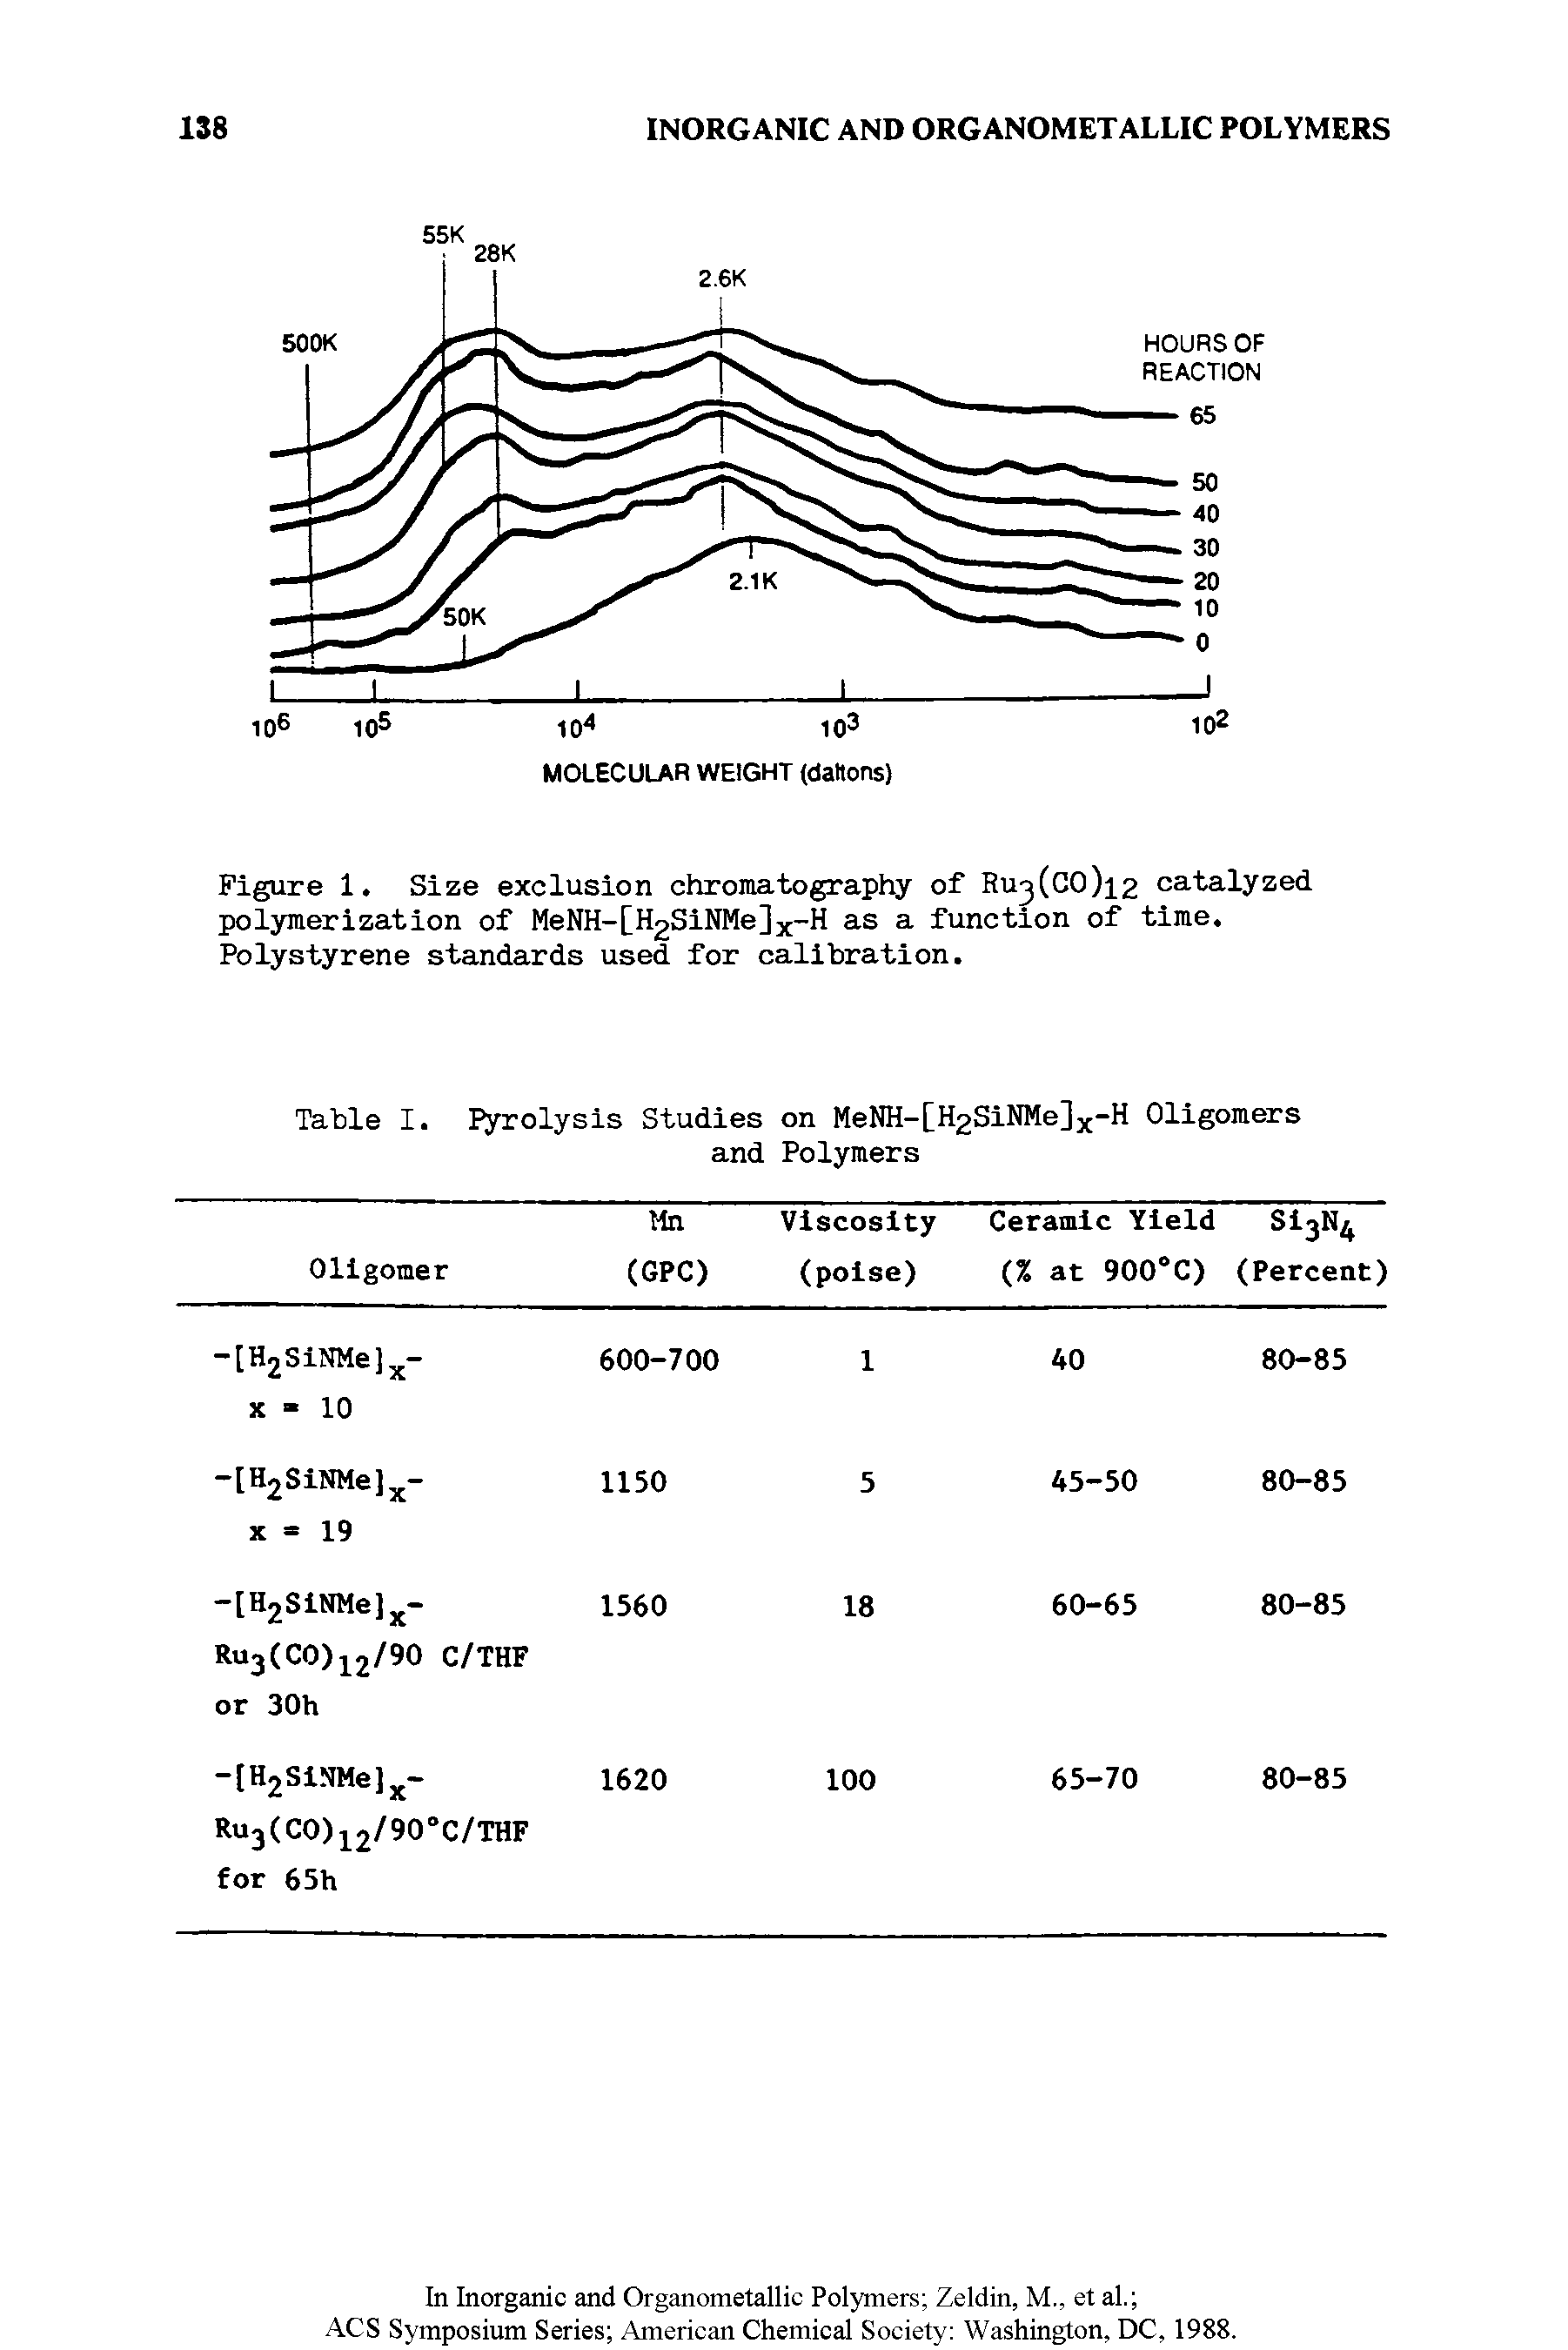 Figure 1. Size exclusion chromatography of Ru3(C0)i2 catalyzed polymerization of MeNH-[H2SiNMe]x-H as a function of time. Polystyrene standards used for calibration.